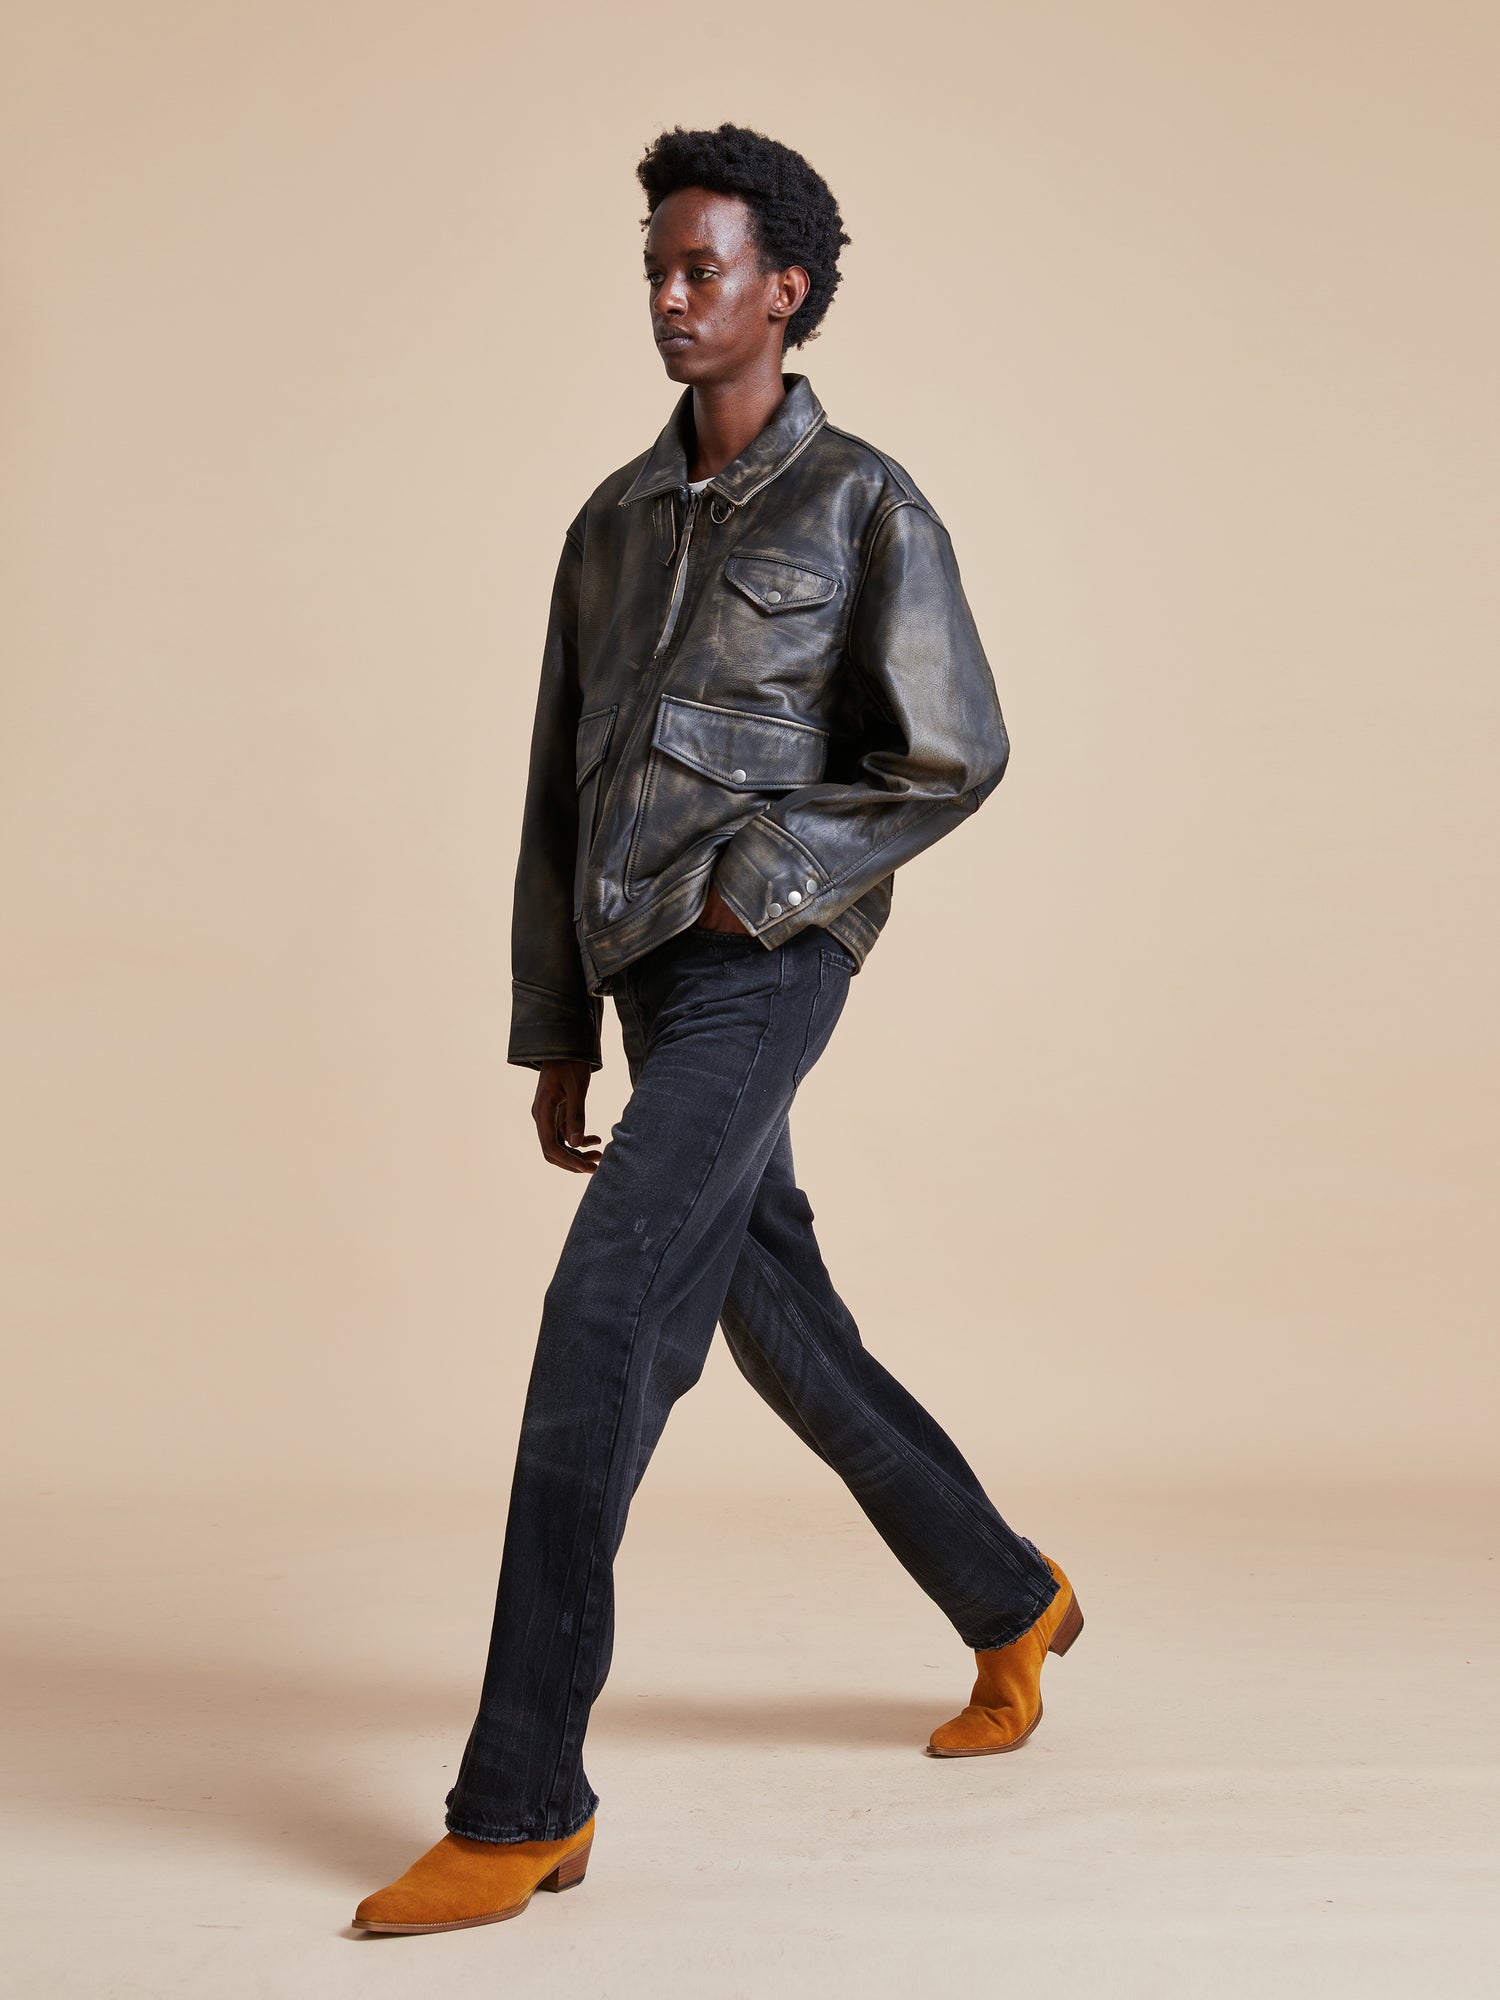 A man in a Found Distressed Leather Pocket Jacket and jeans walking on a beige background.